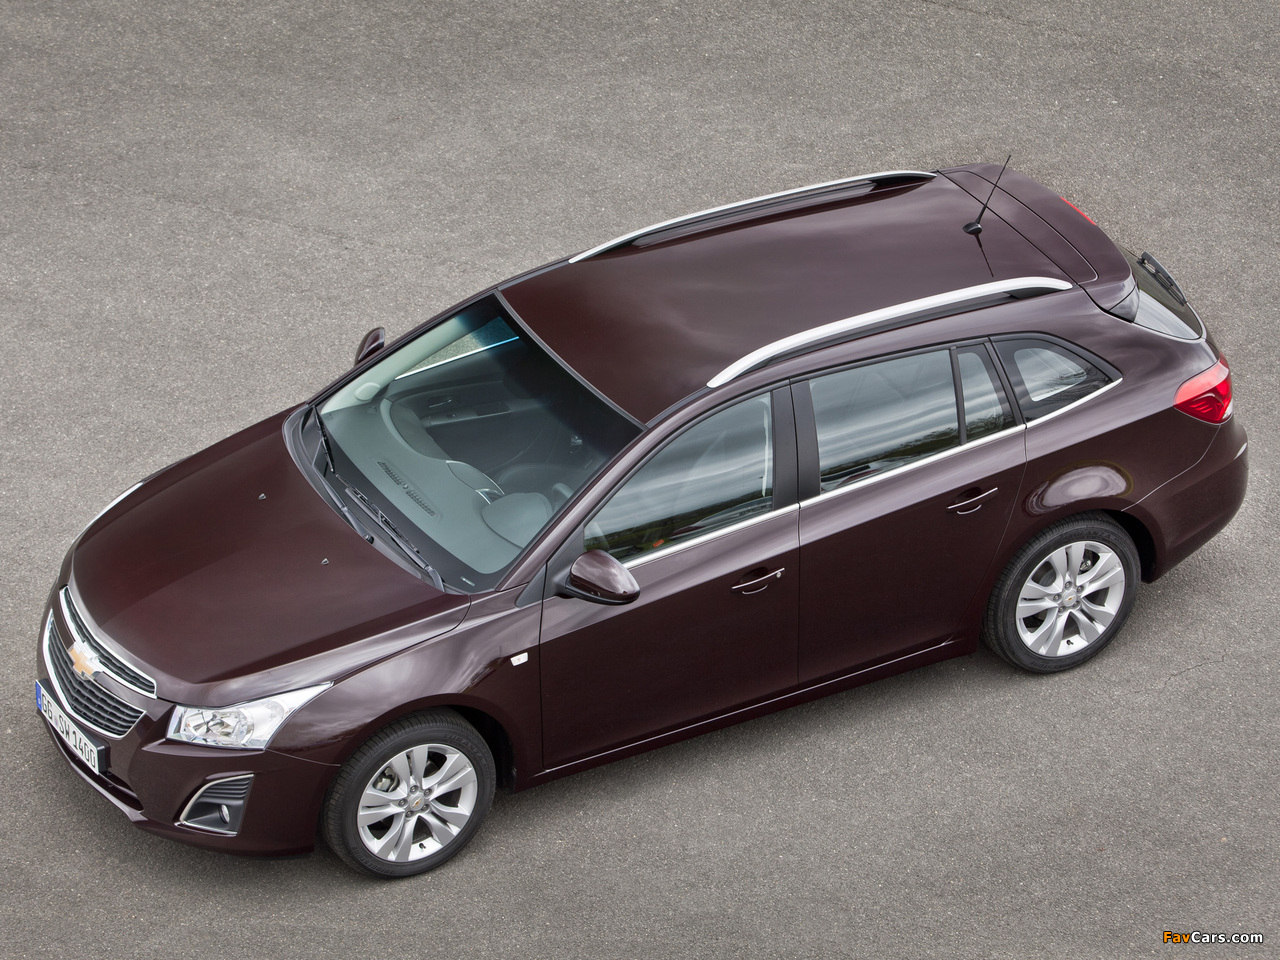 Chevrolet Cruze Station Wagon (J300) 2012 pictures (1280 x 960)